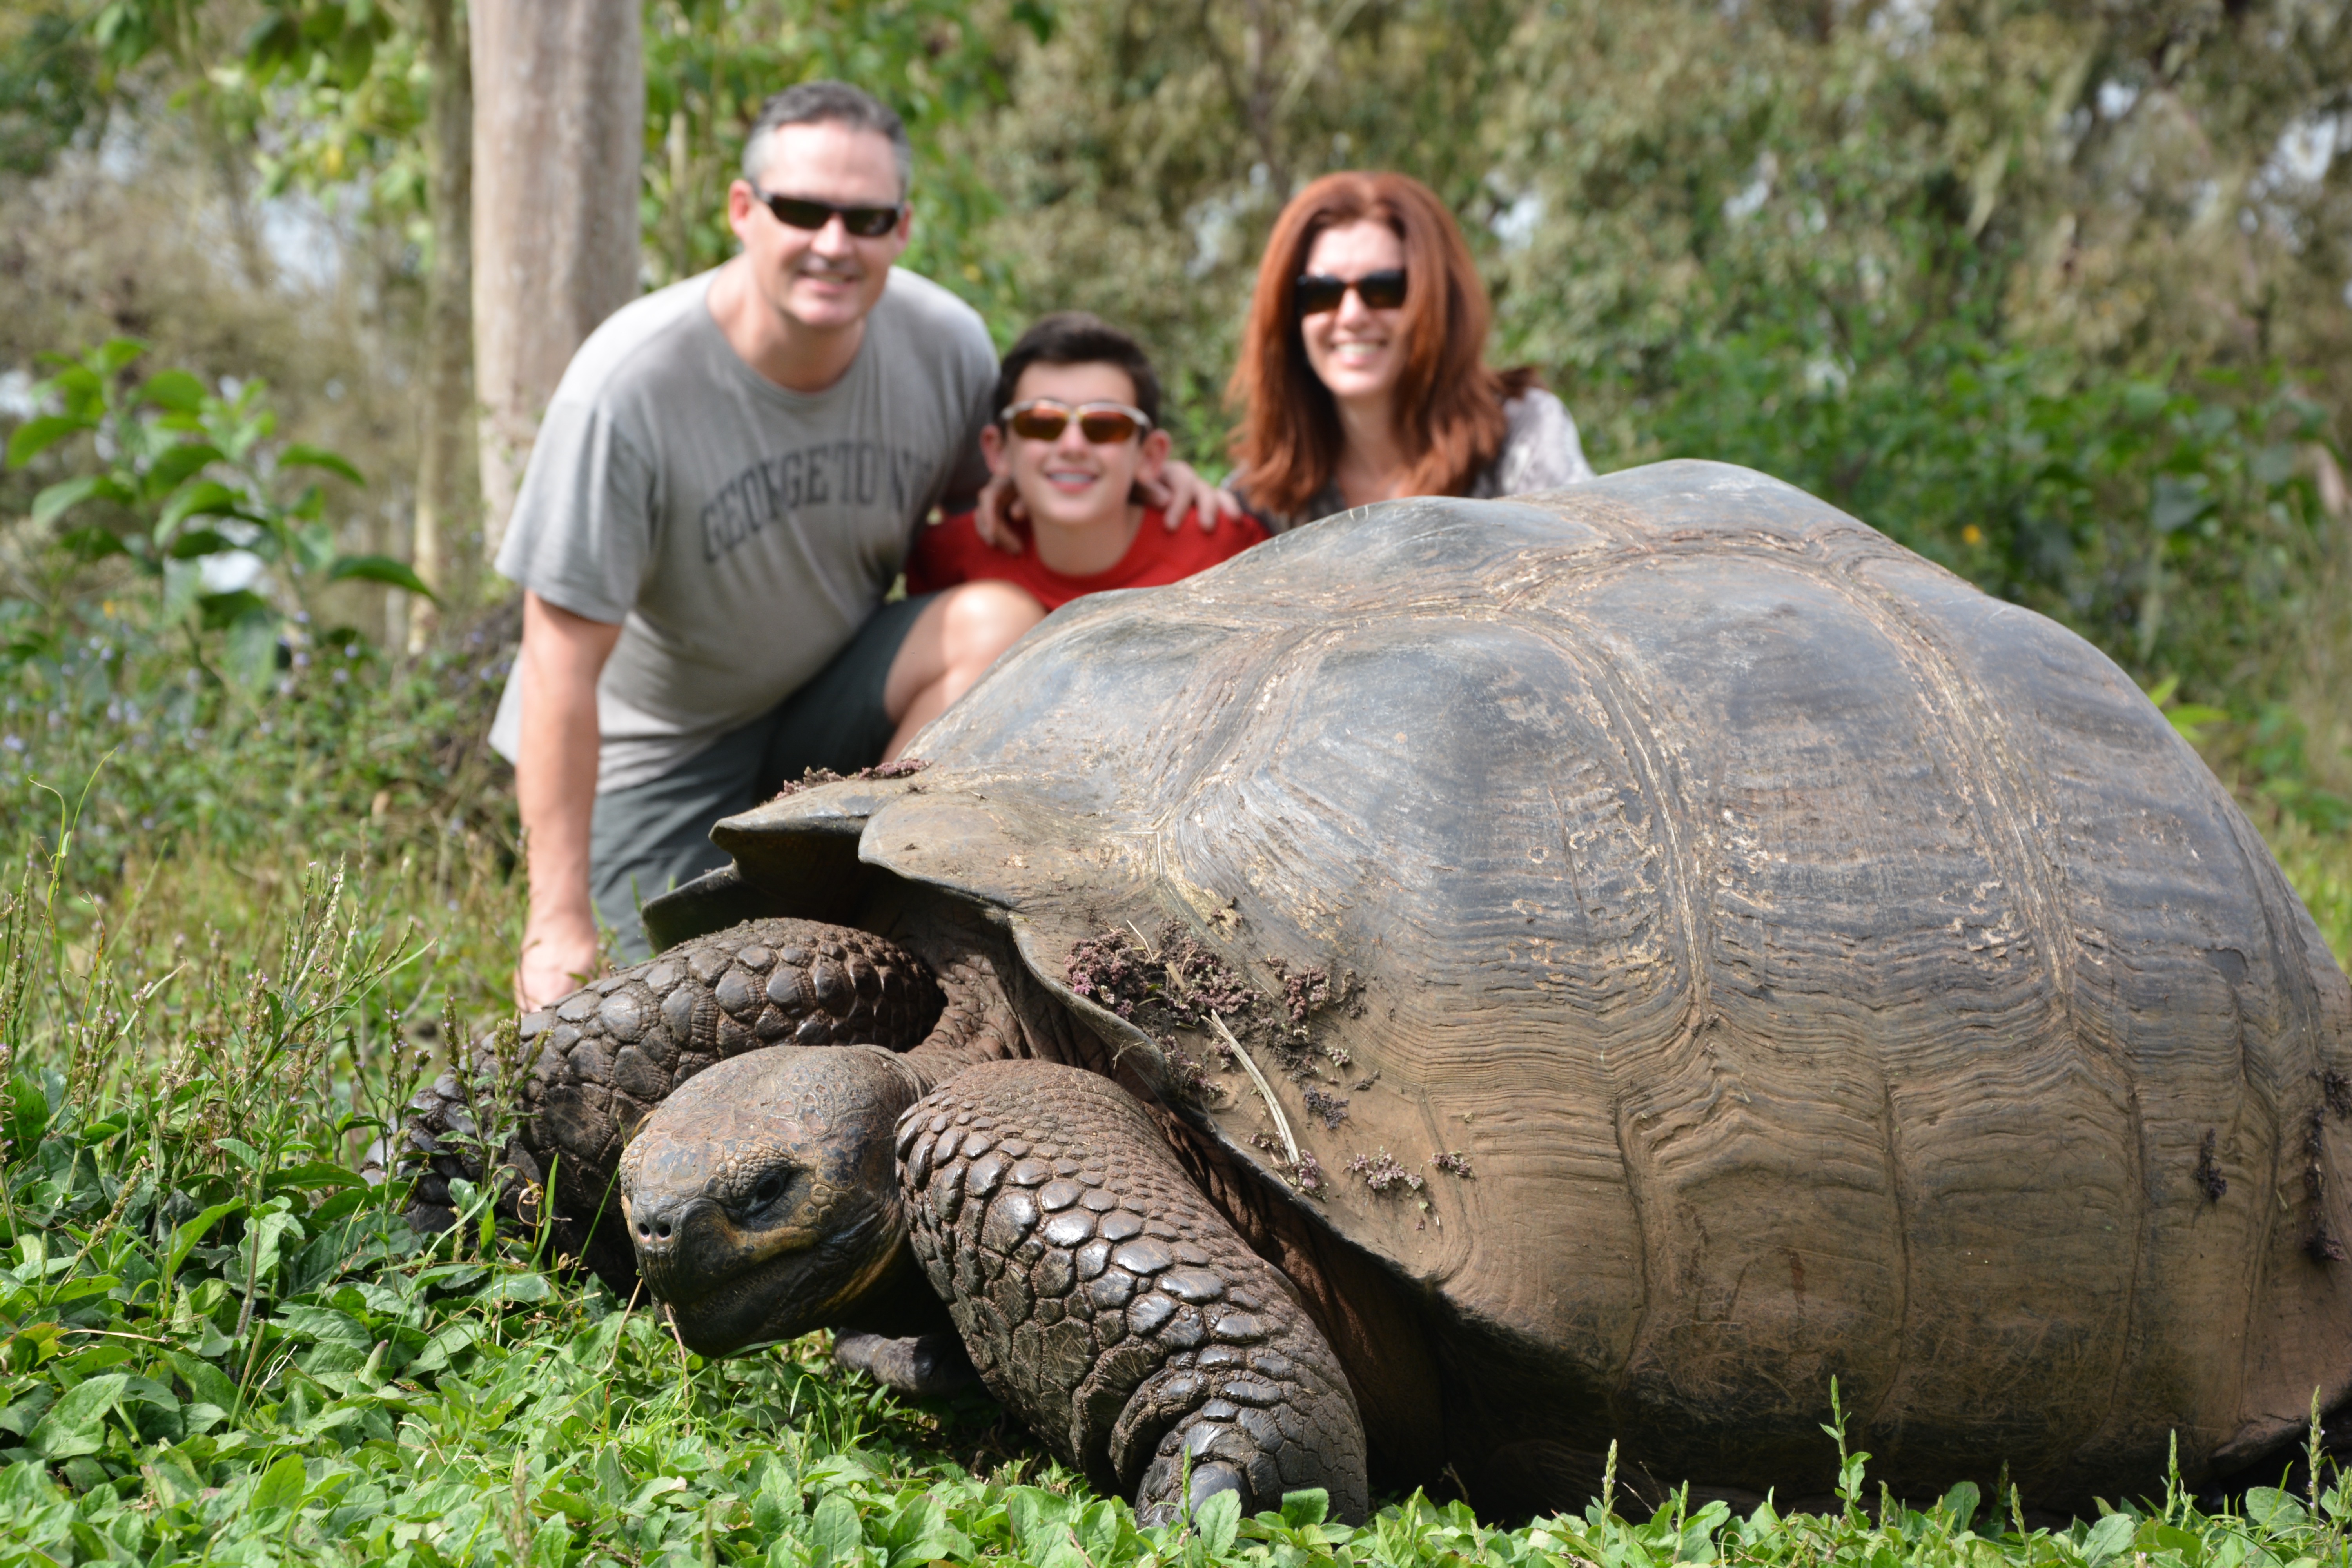 Galapagos Islands Eucador Amie OShaughnessy Travel with Kids Holidays with children By the Sea with three